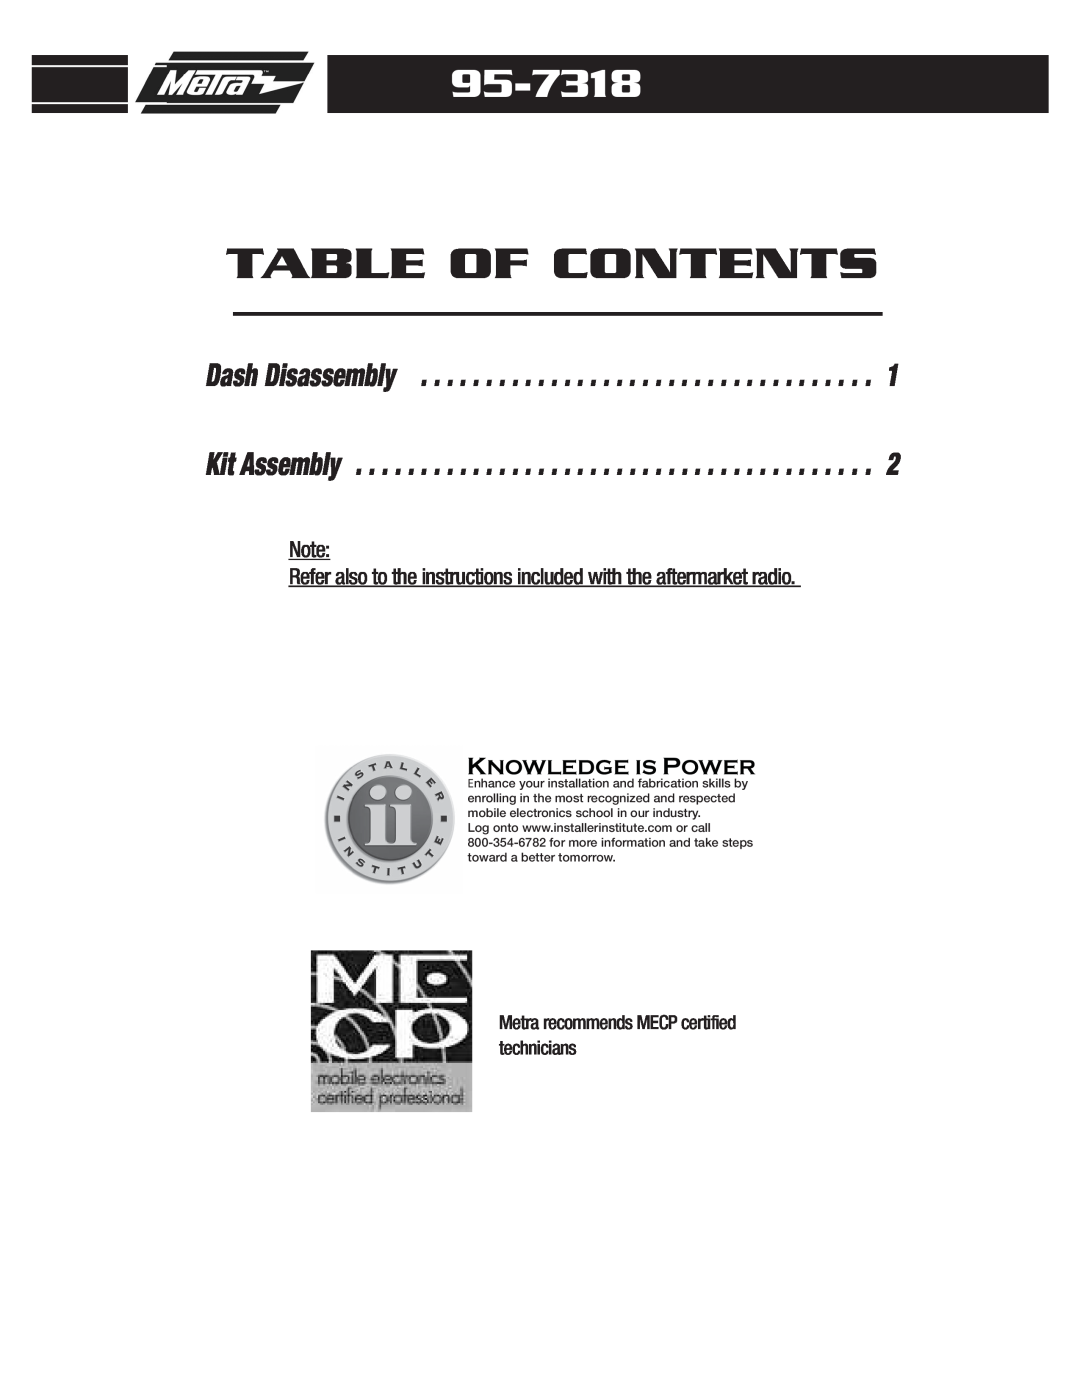 Metra Electronics 95-7318 installation instructions Table Of Contents, Dash Disassembly, Kit Assembly, Knowledge Is Power 